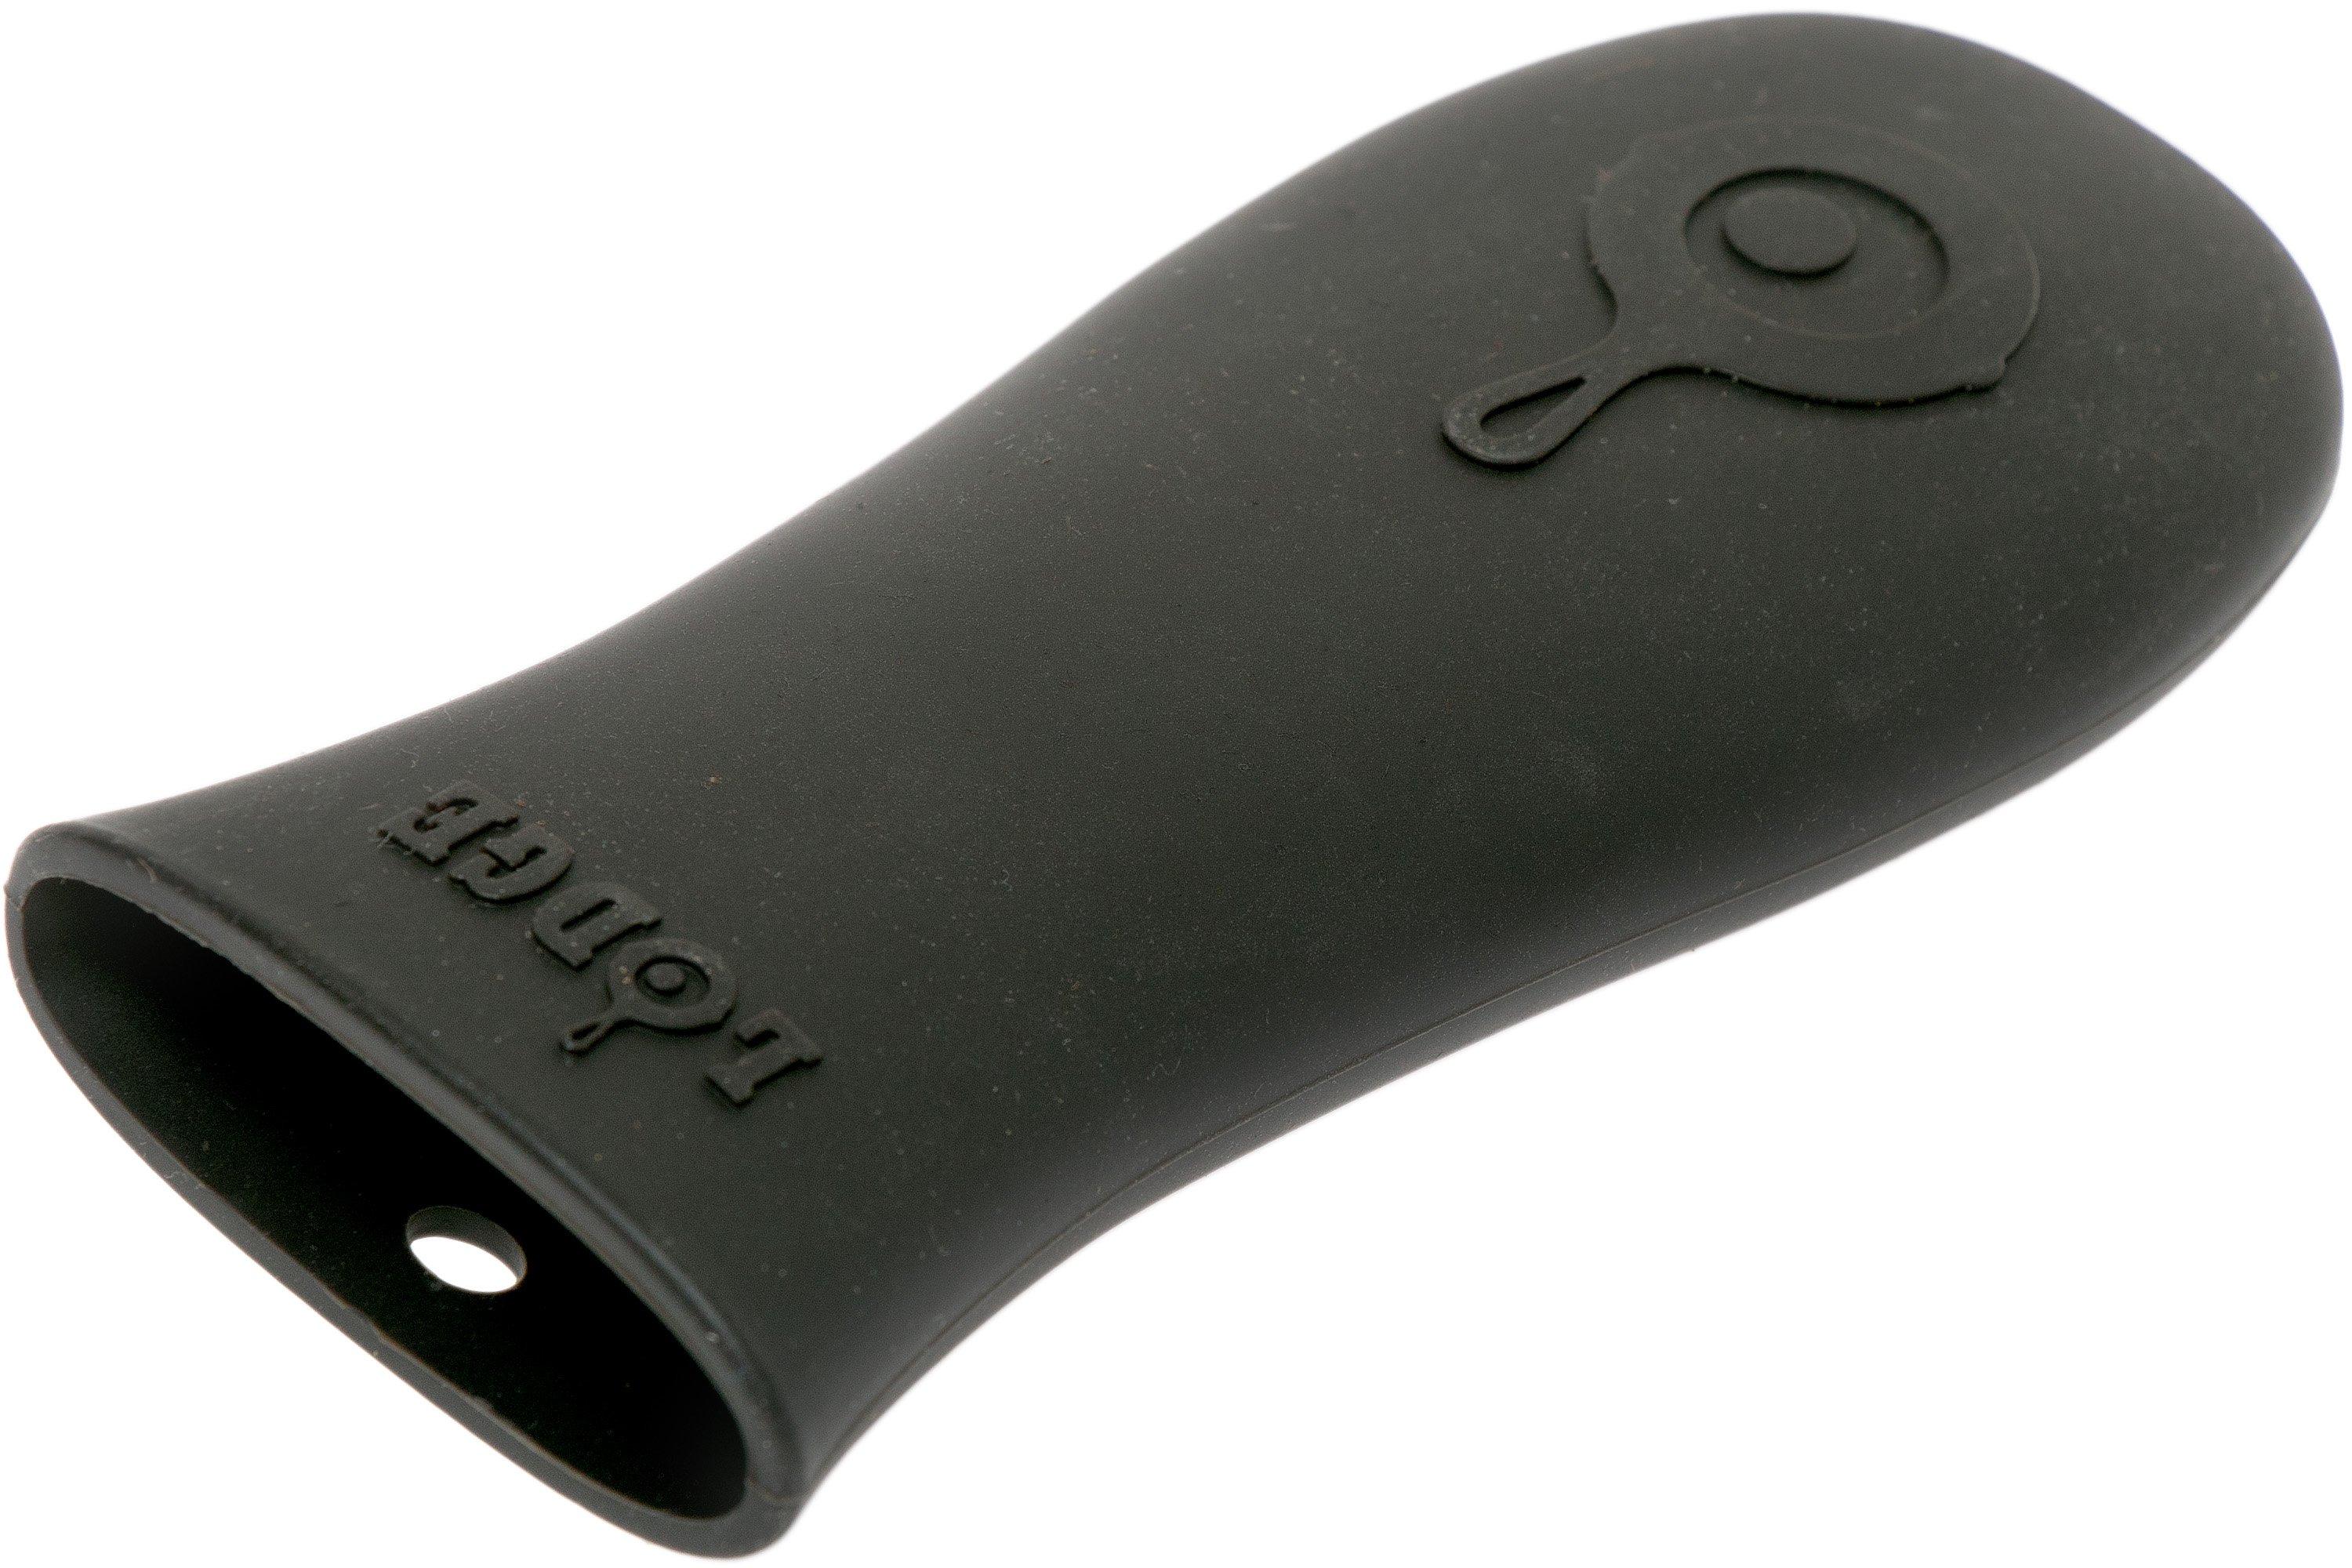 Lodge ASAHH11 Silicone Assist Handle Holder, Black